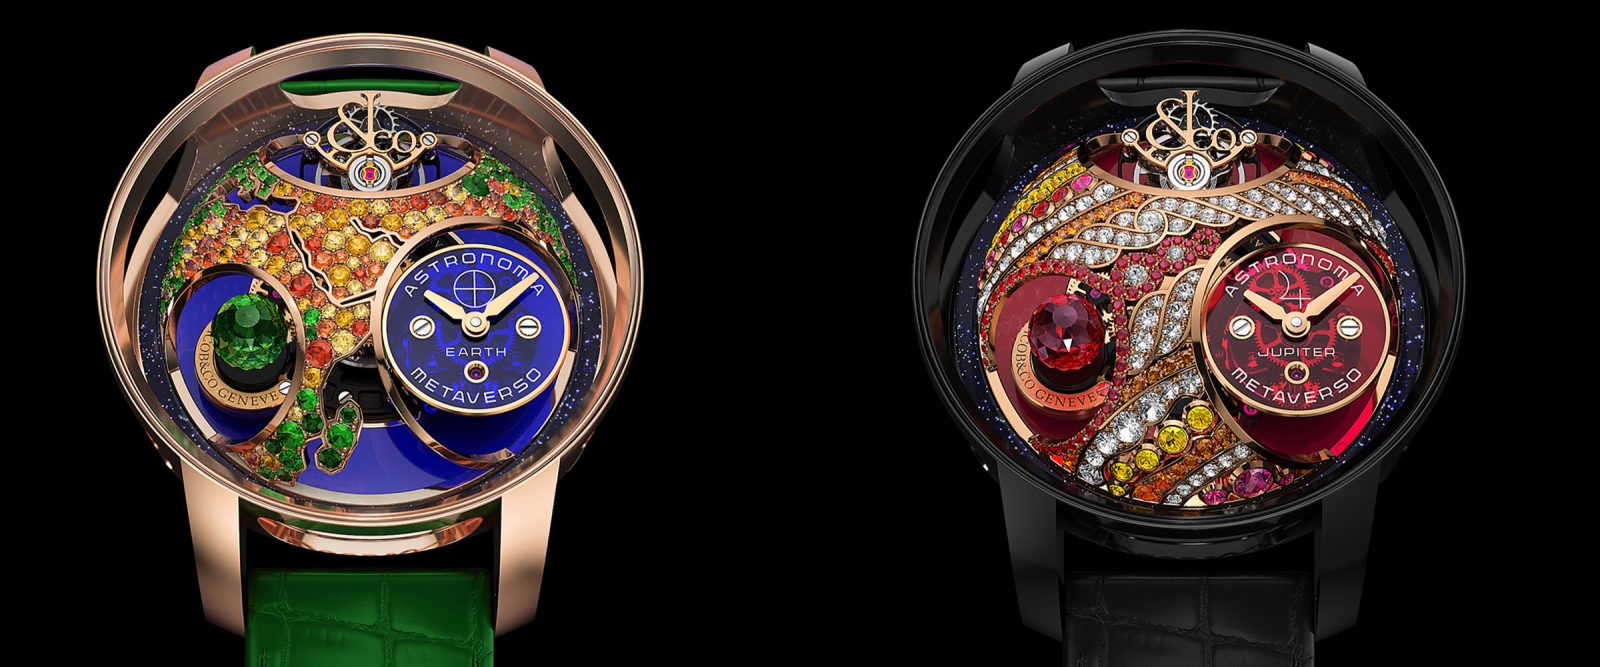 Jacob & Co. Launches First-Ever Luxury NFT Collection: Astronomia Metaverso